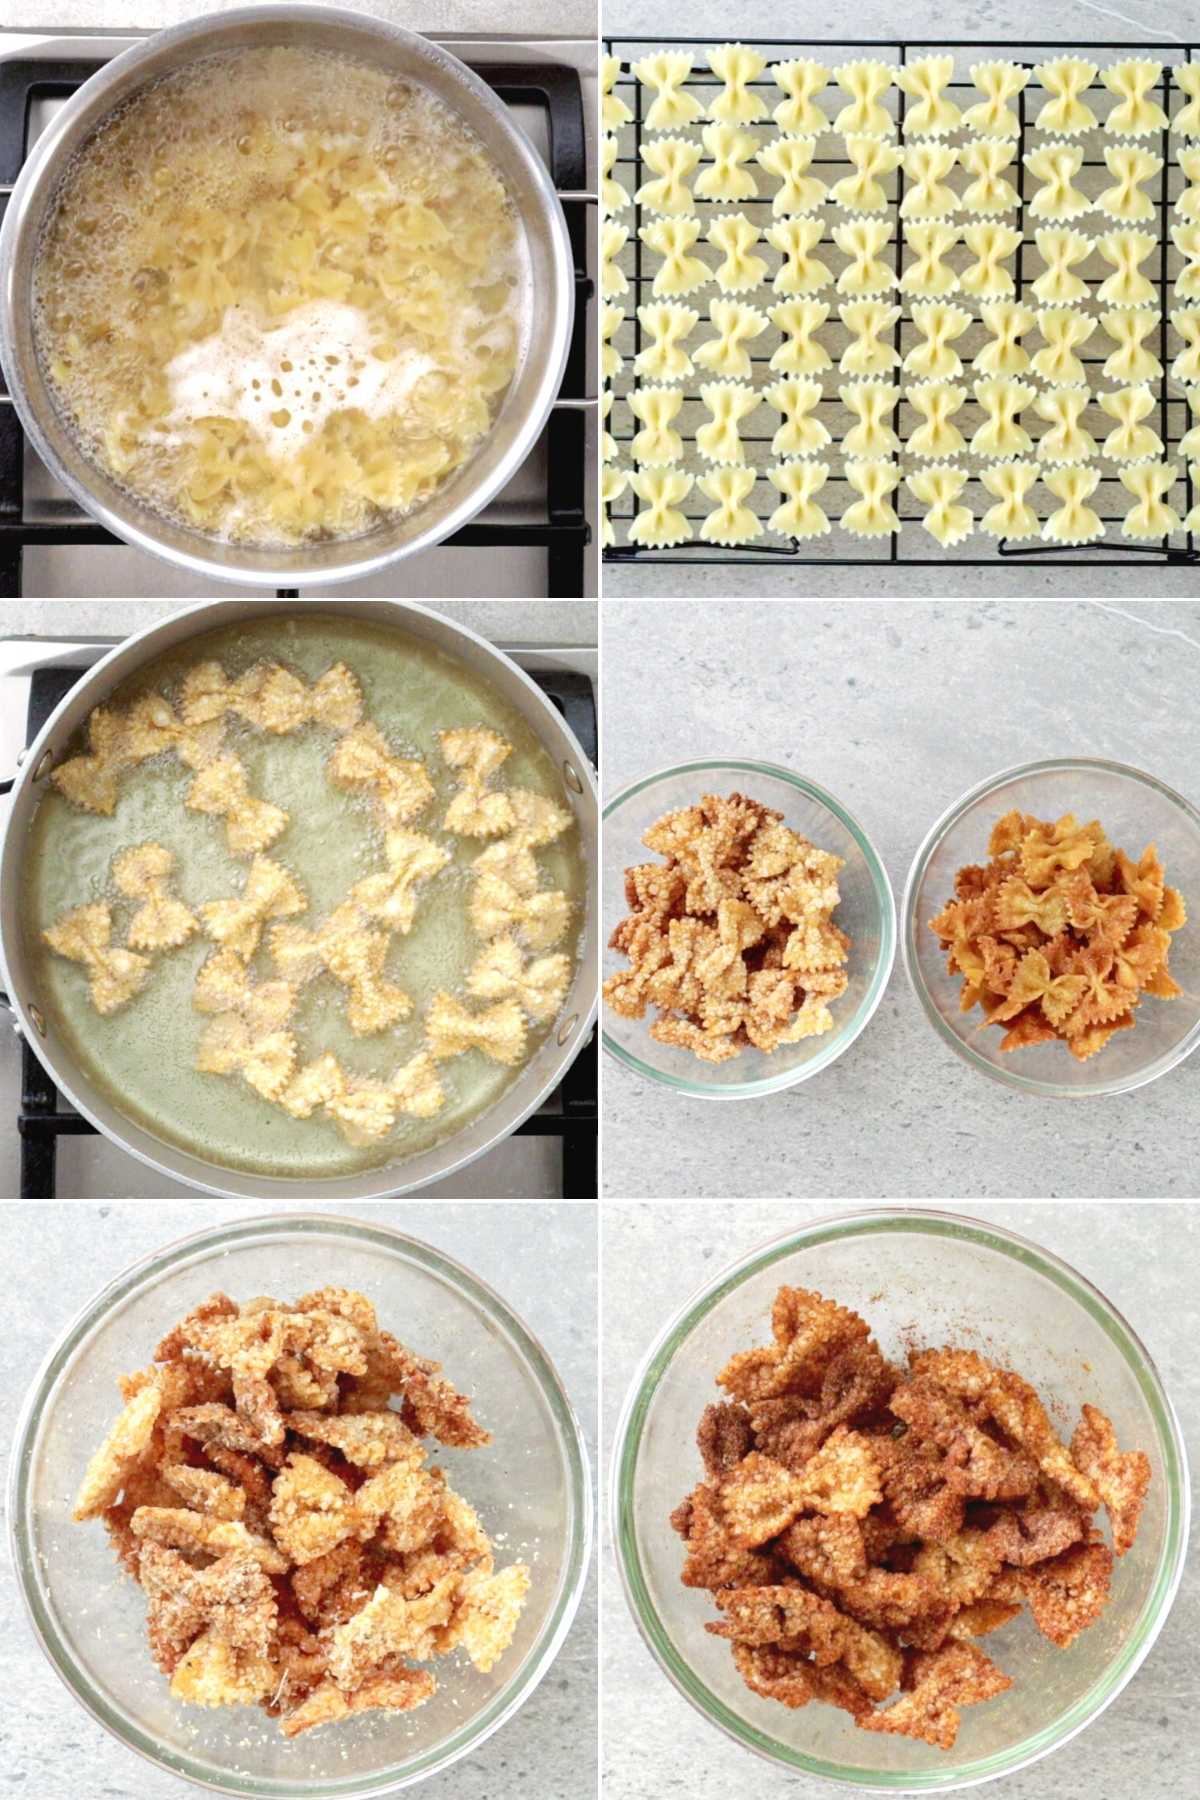 Steps on how to make pasta chips.